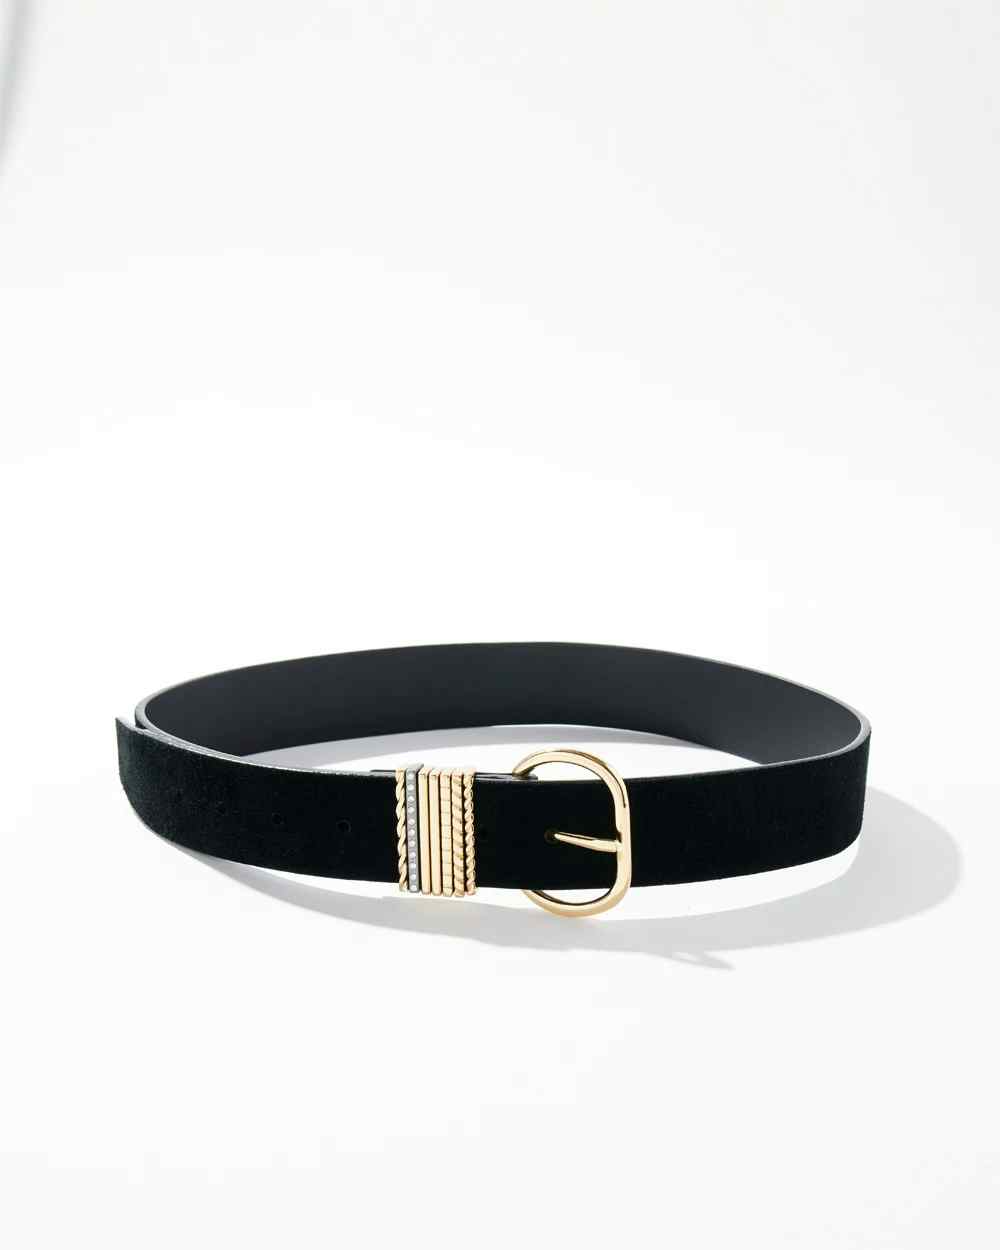 Shop Women's Belts - Skinny, Leather and Stretch Belts | White House ...